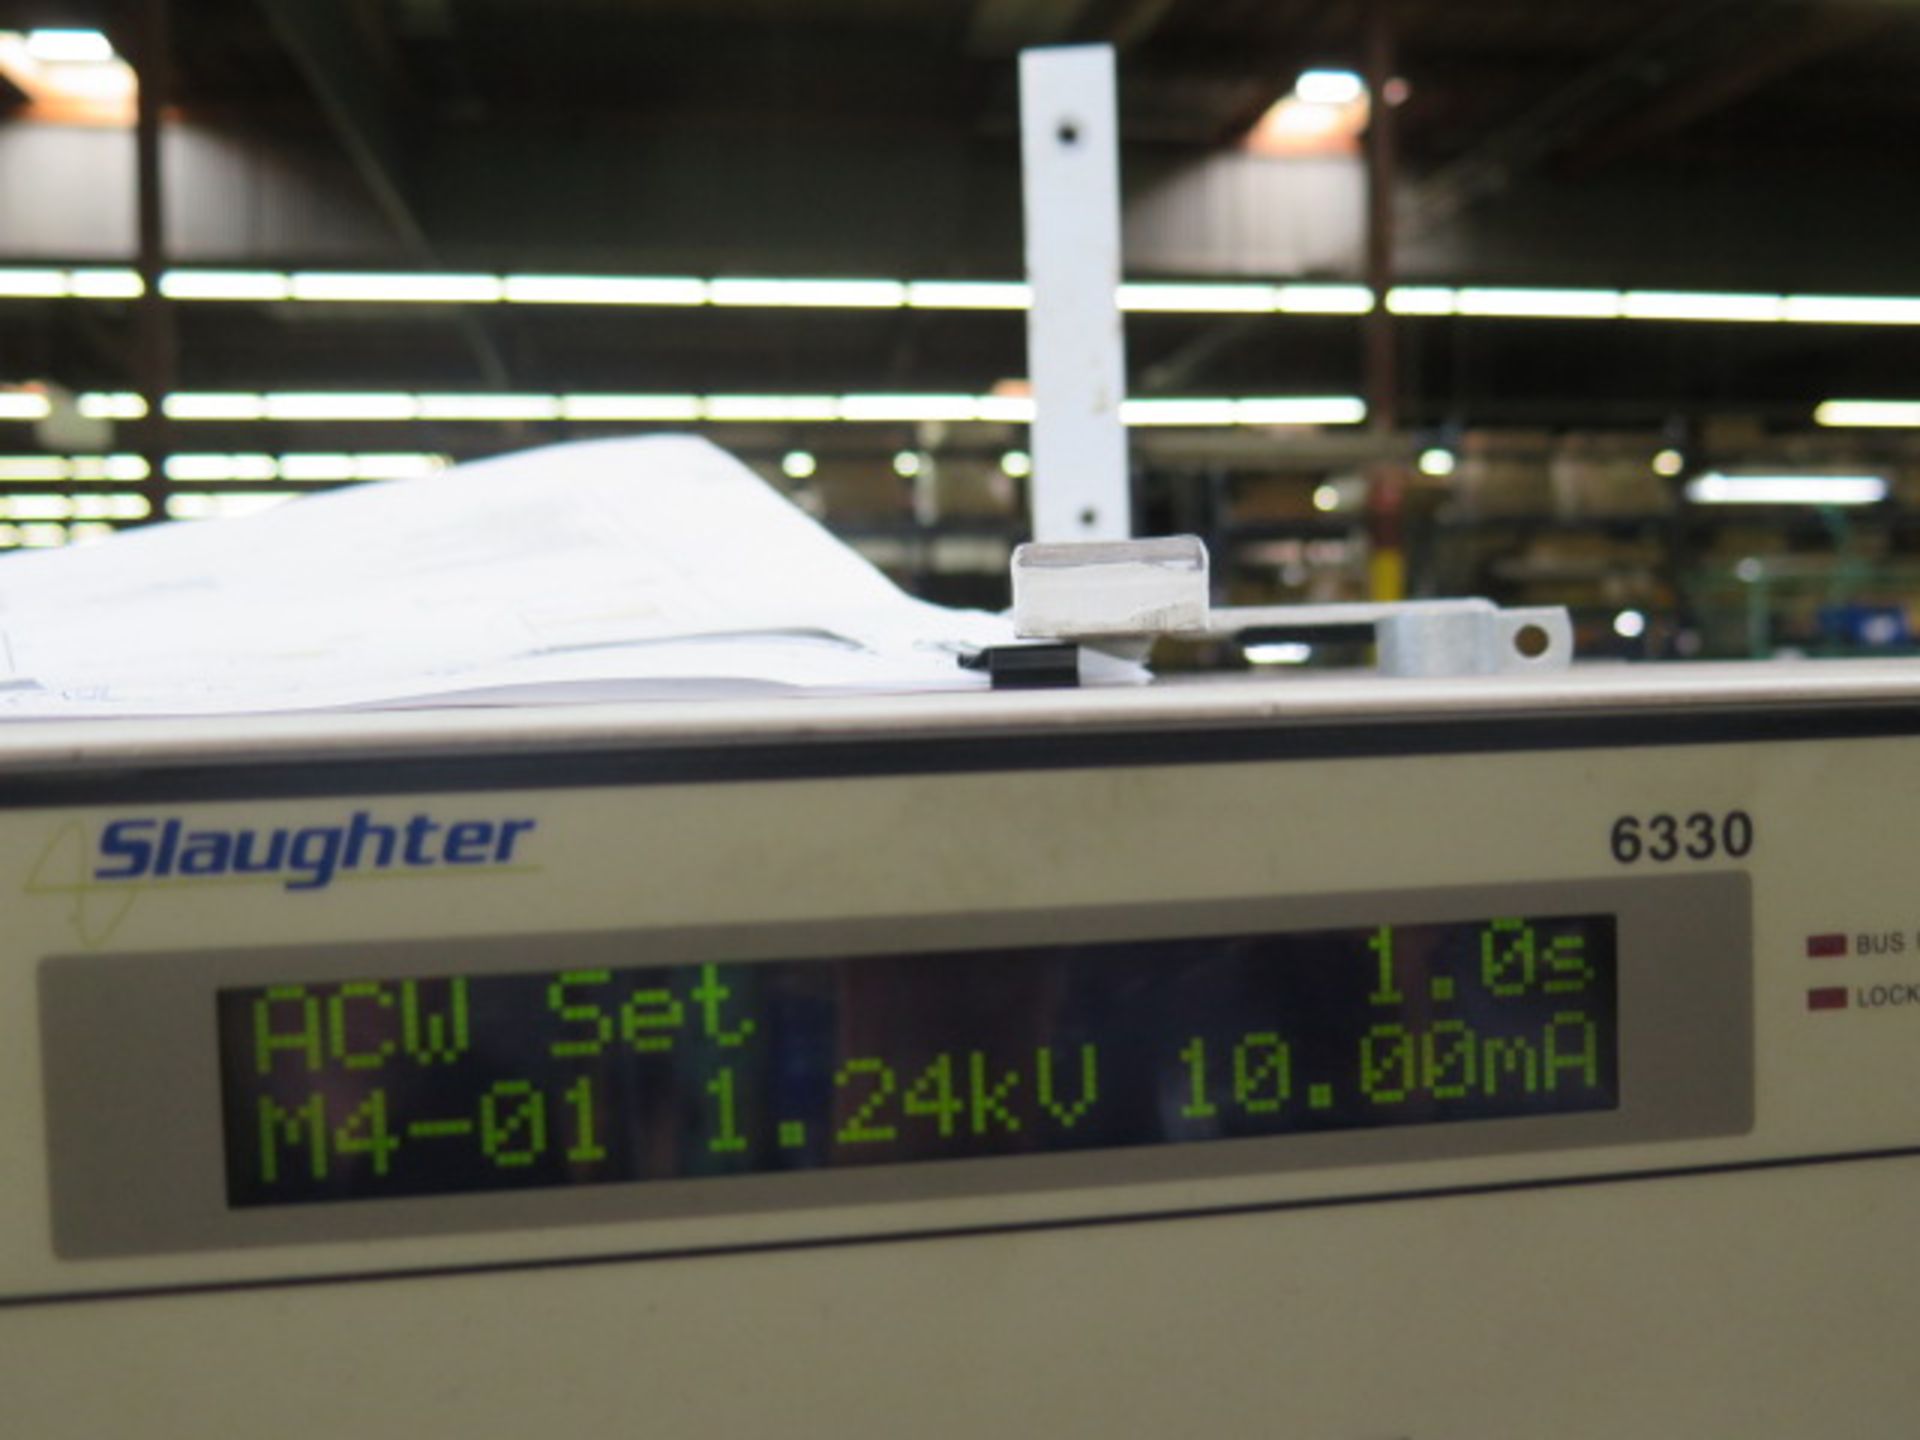 Slaughter 6330 ACW/DCW/IR/GB/LLT and Run Tester (SOLD AS-IS - NO WARRANTY) - Image 4 of 4